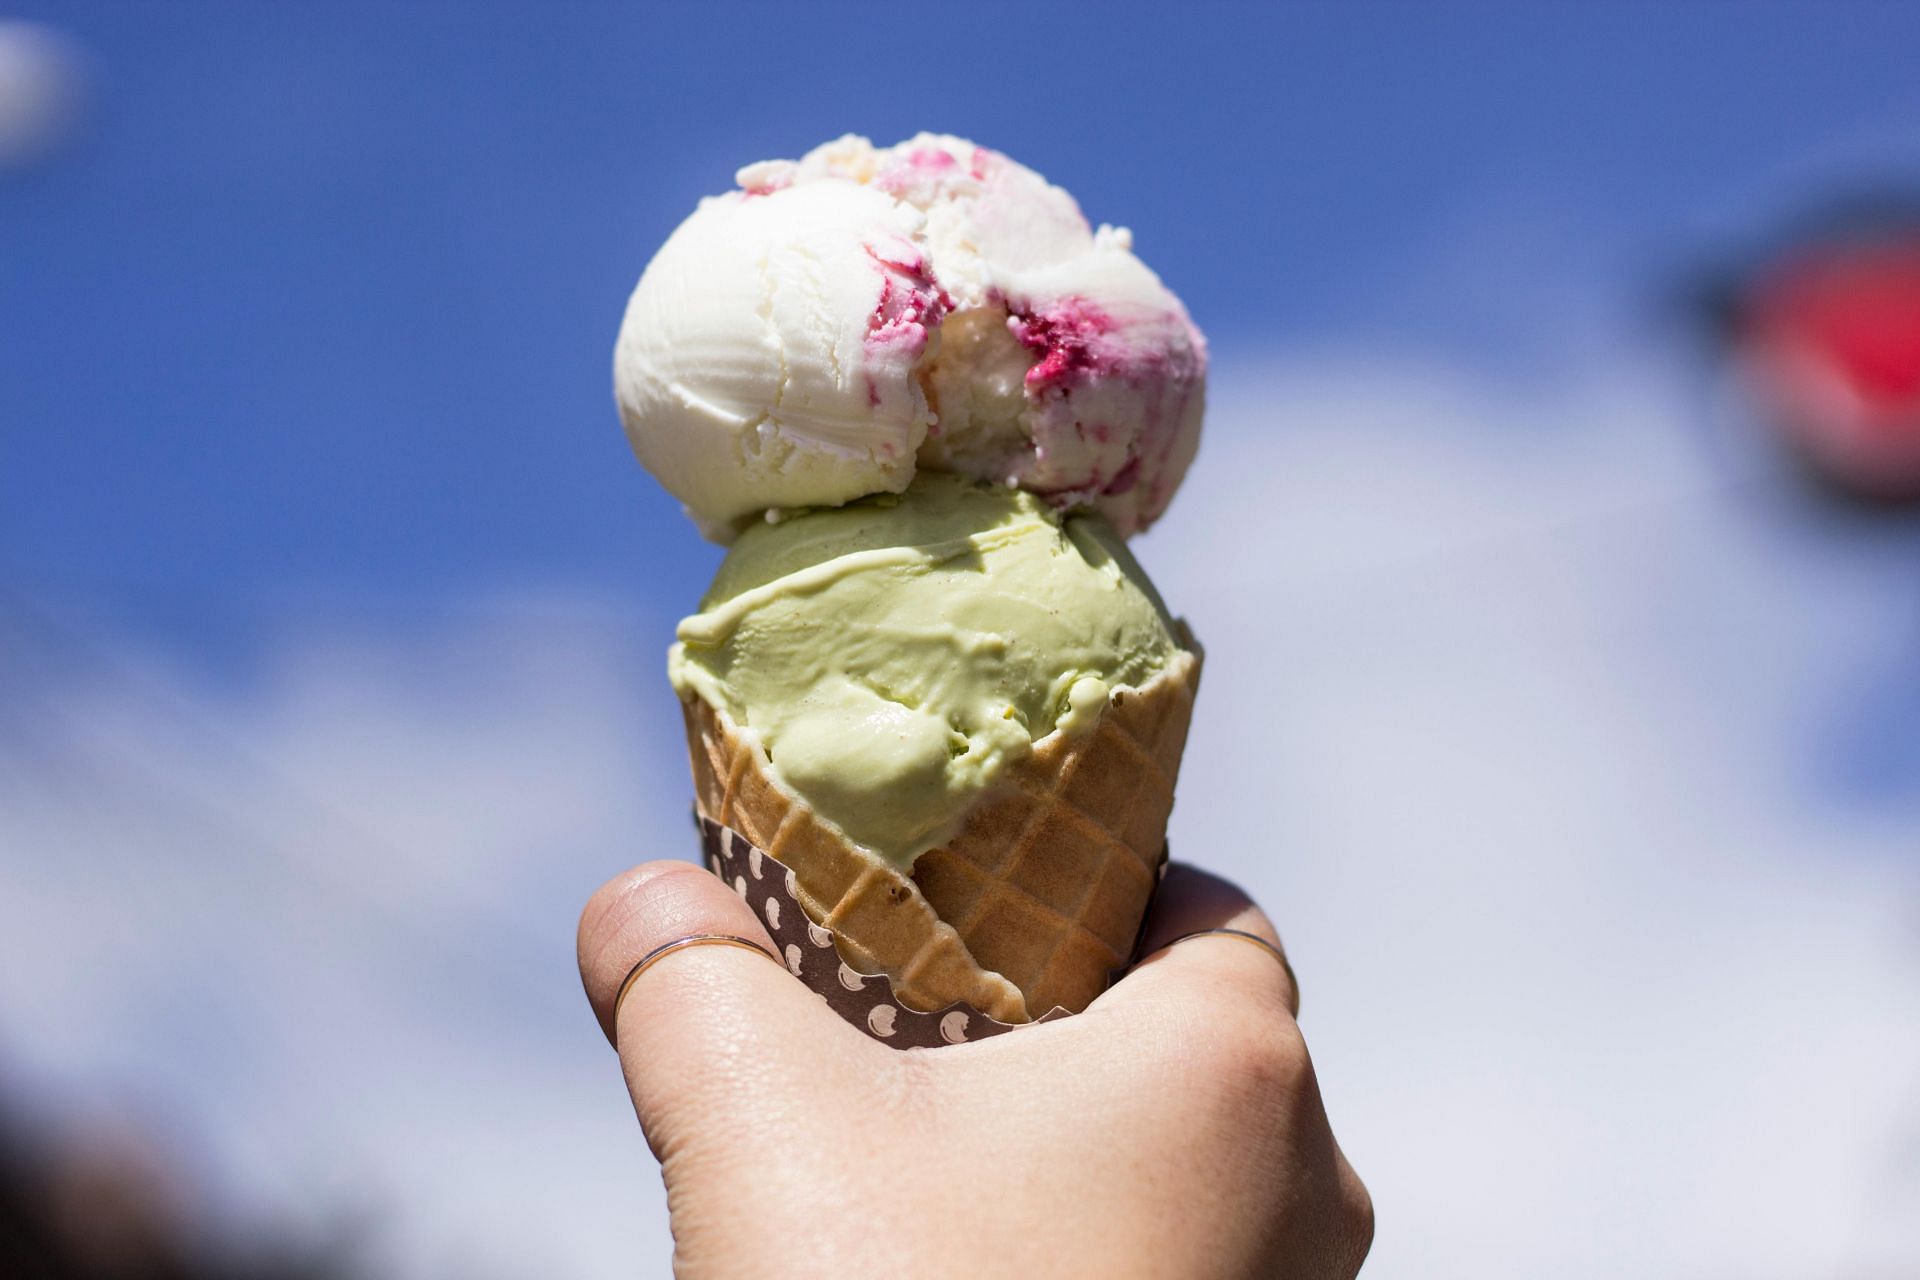 ice cream for sore throat (image sourced via Pexels / Photo by jean)